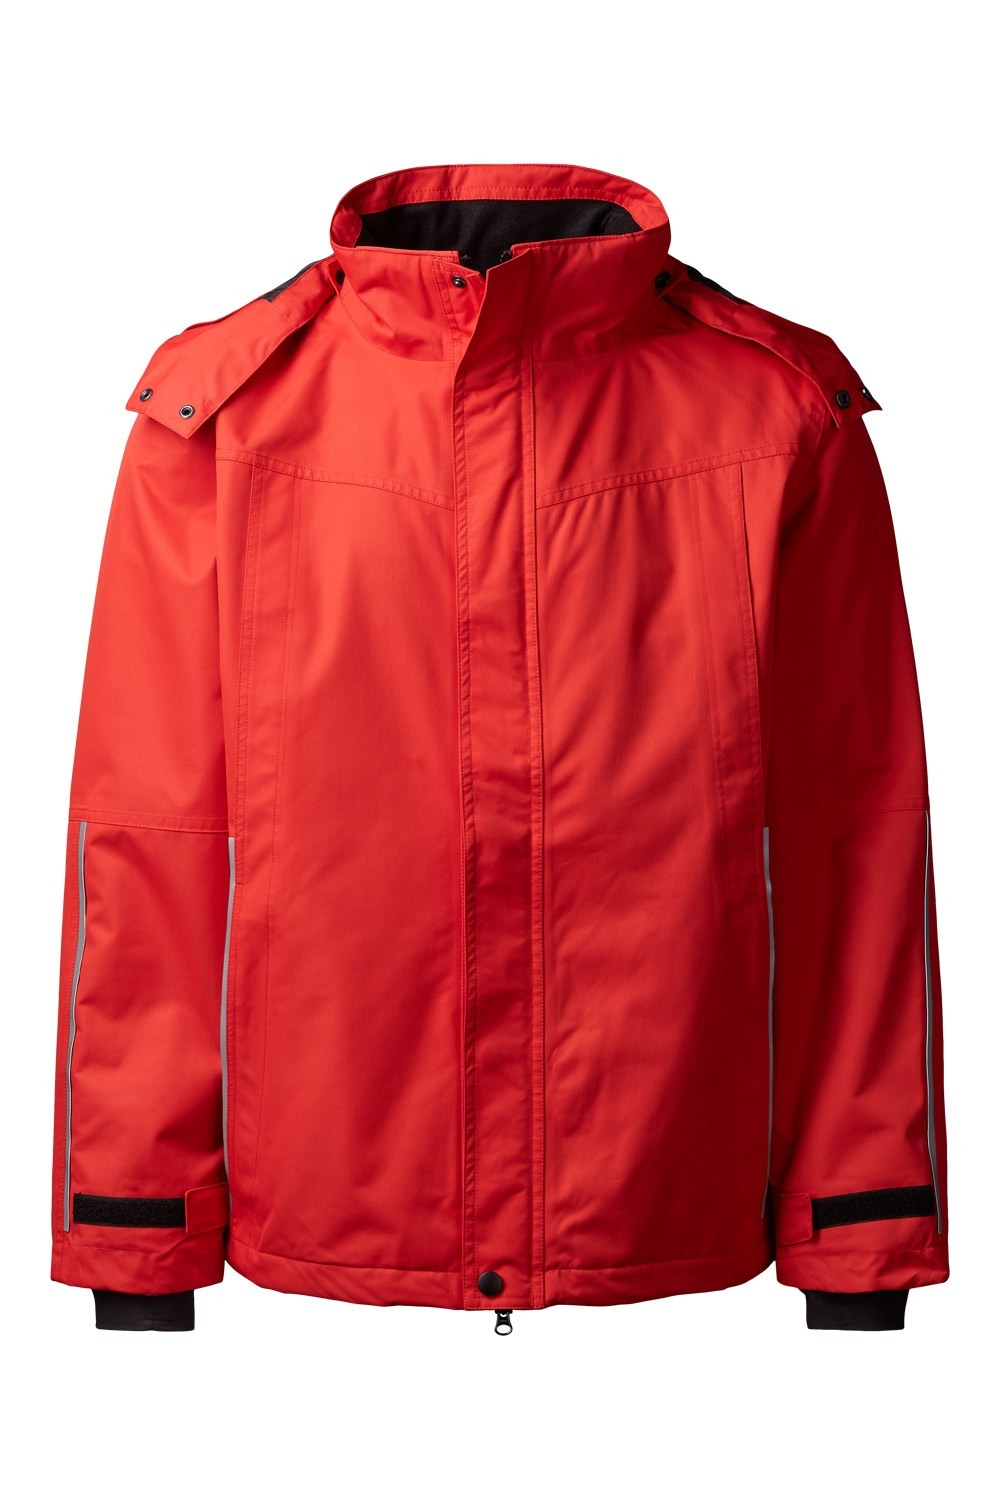 99045-4 xplor care shell jacket unisex red front